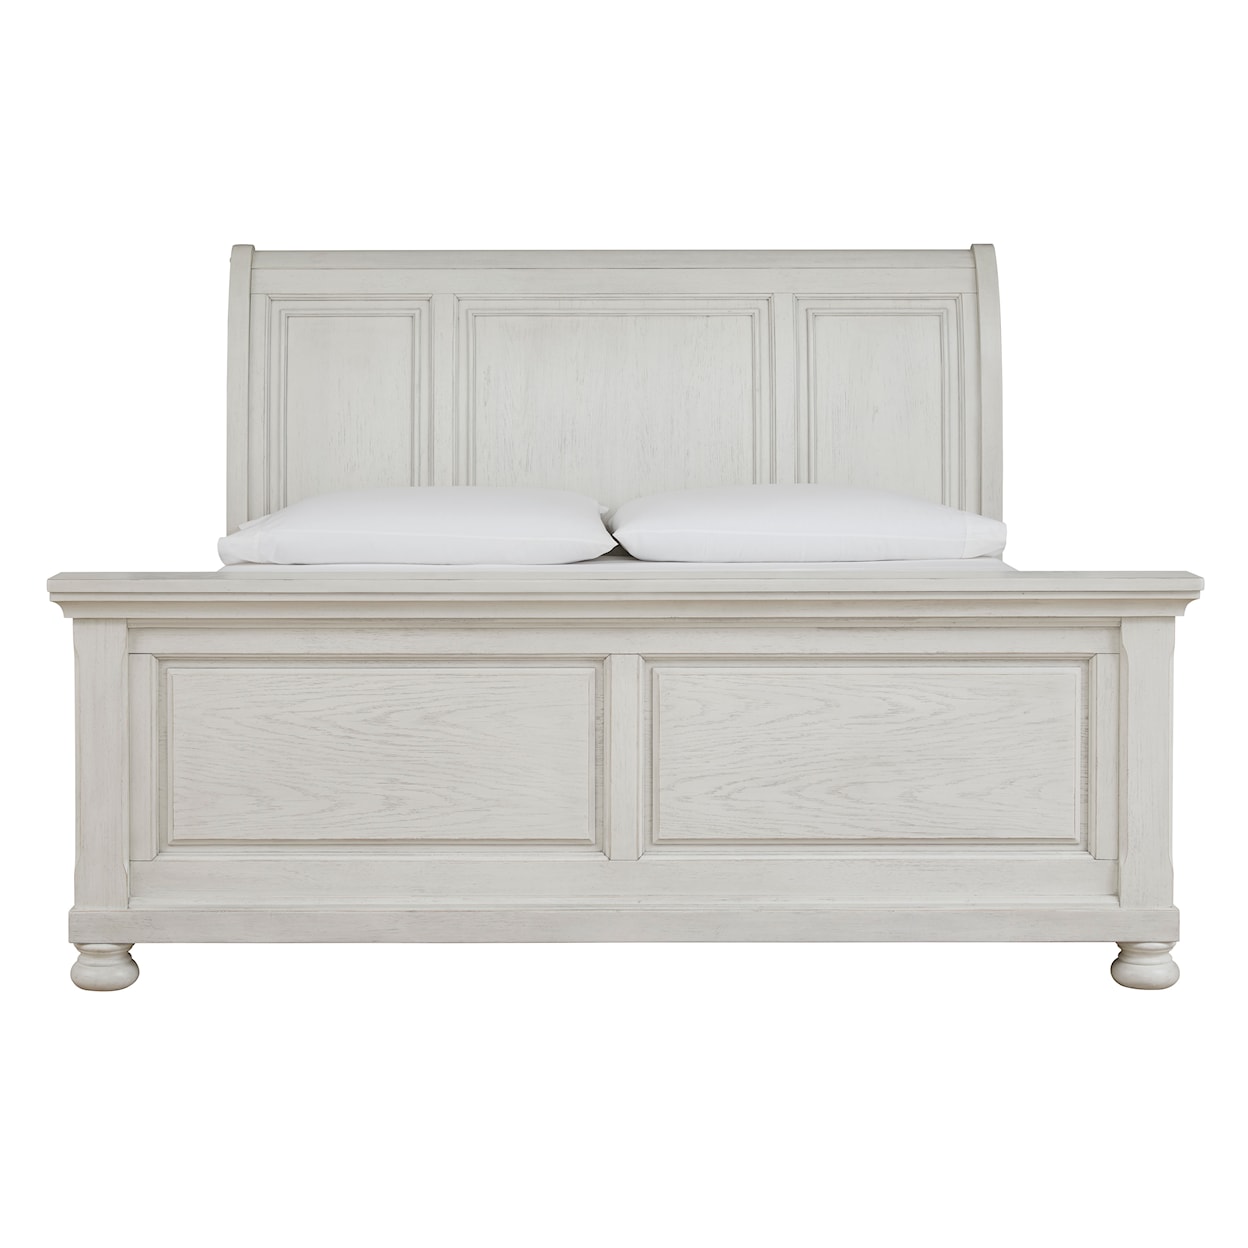 Signature Design by Ashley Furniture Robbinsdale Queen Sleigh Bed